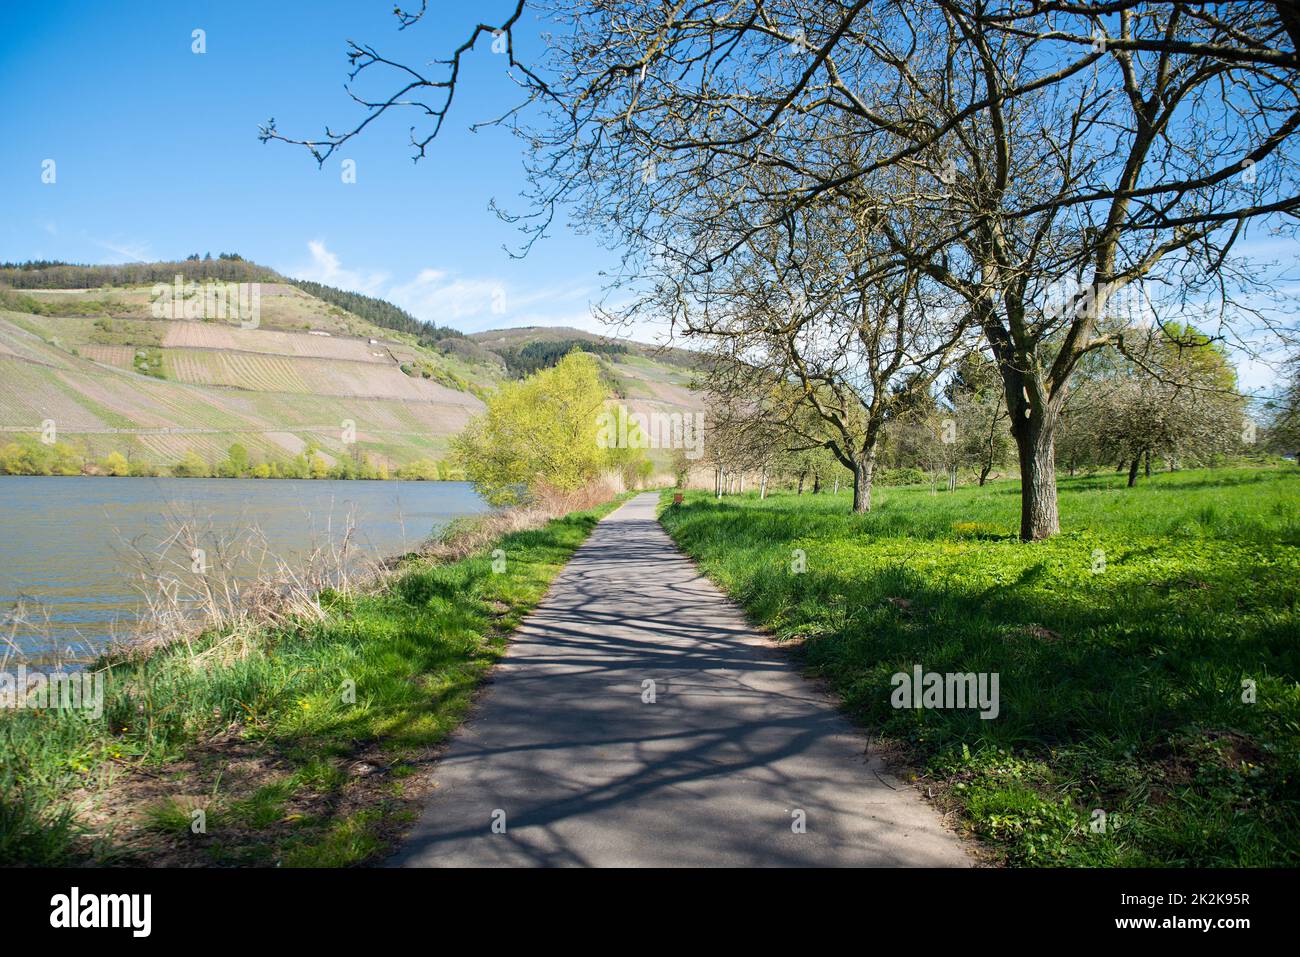 Landscape with the river Moselle and the vineyards close to Trier, rhine land palatine in Germany, way next to the riverbed Stock Photo